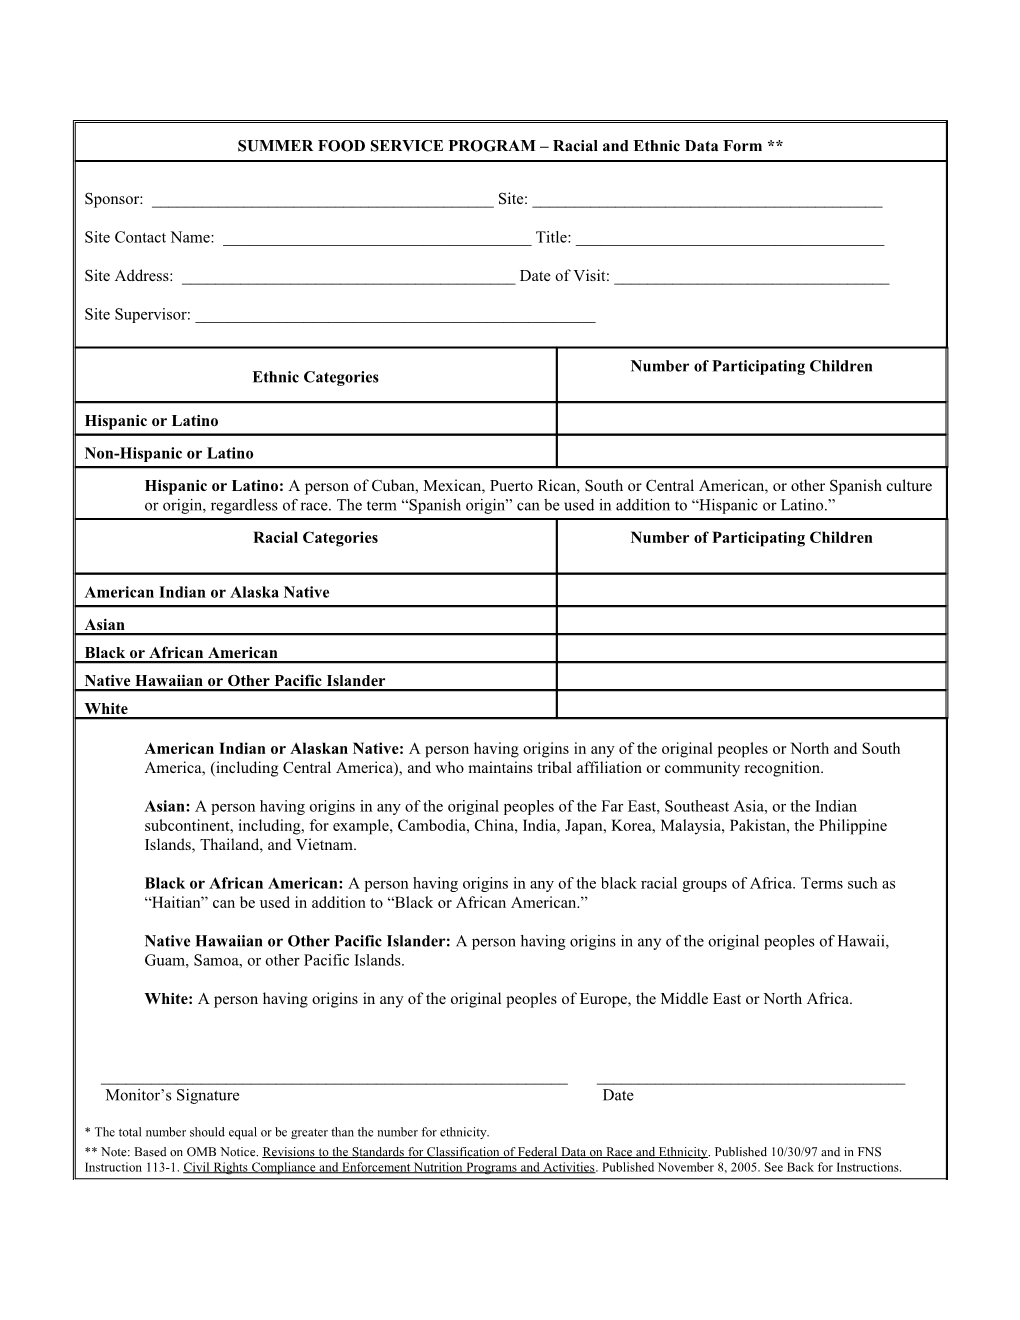 RACIAL Or ETHNIC DATA FORM